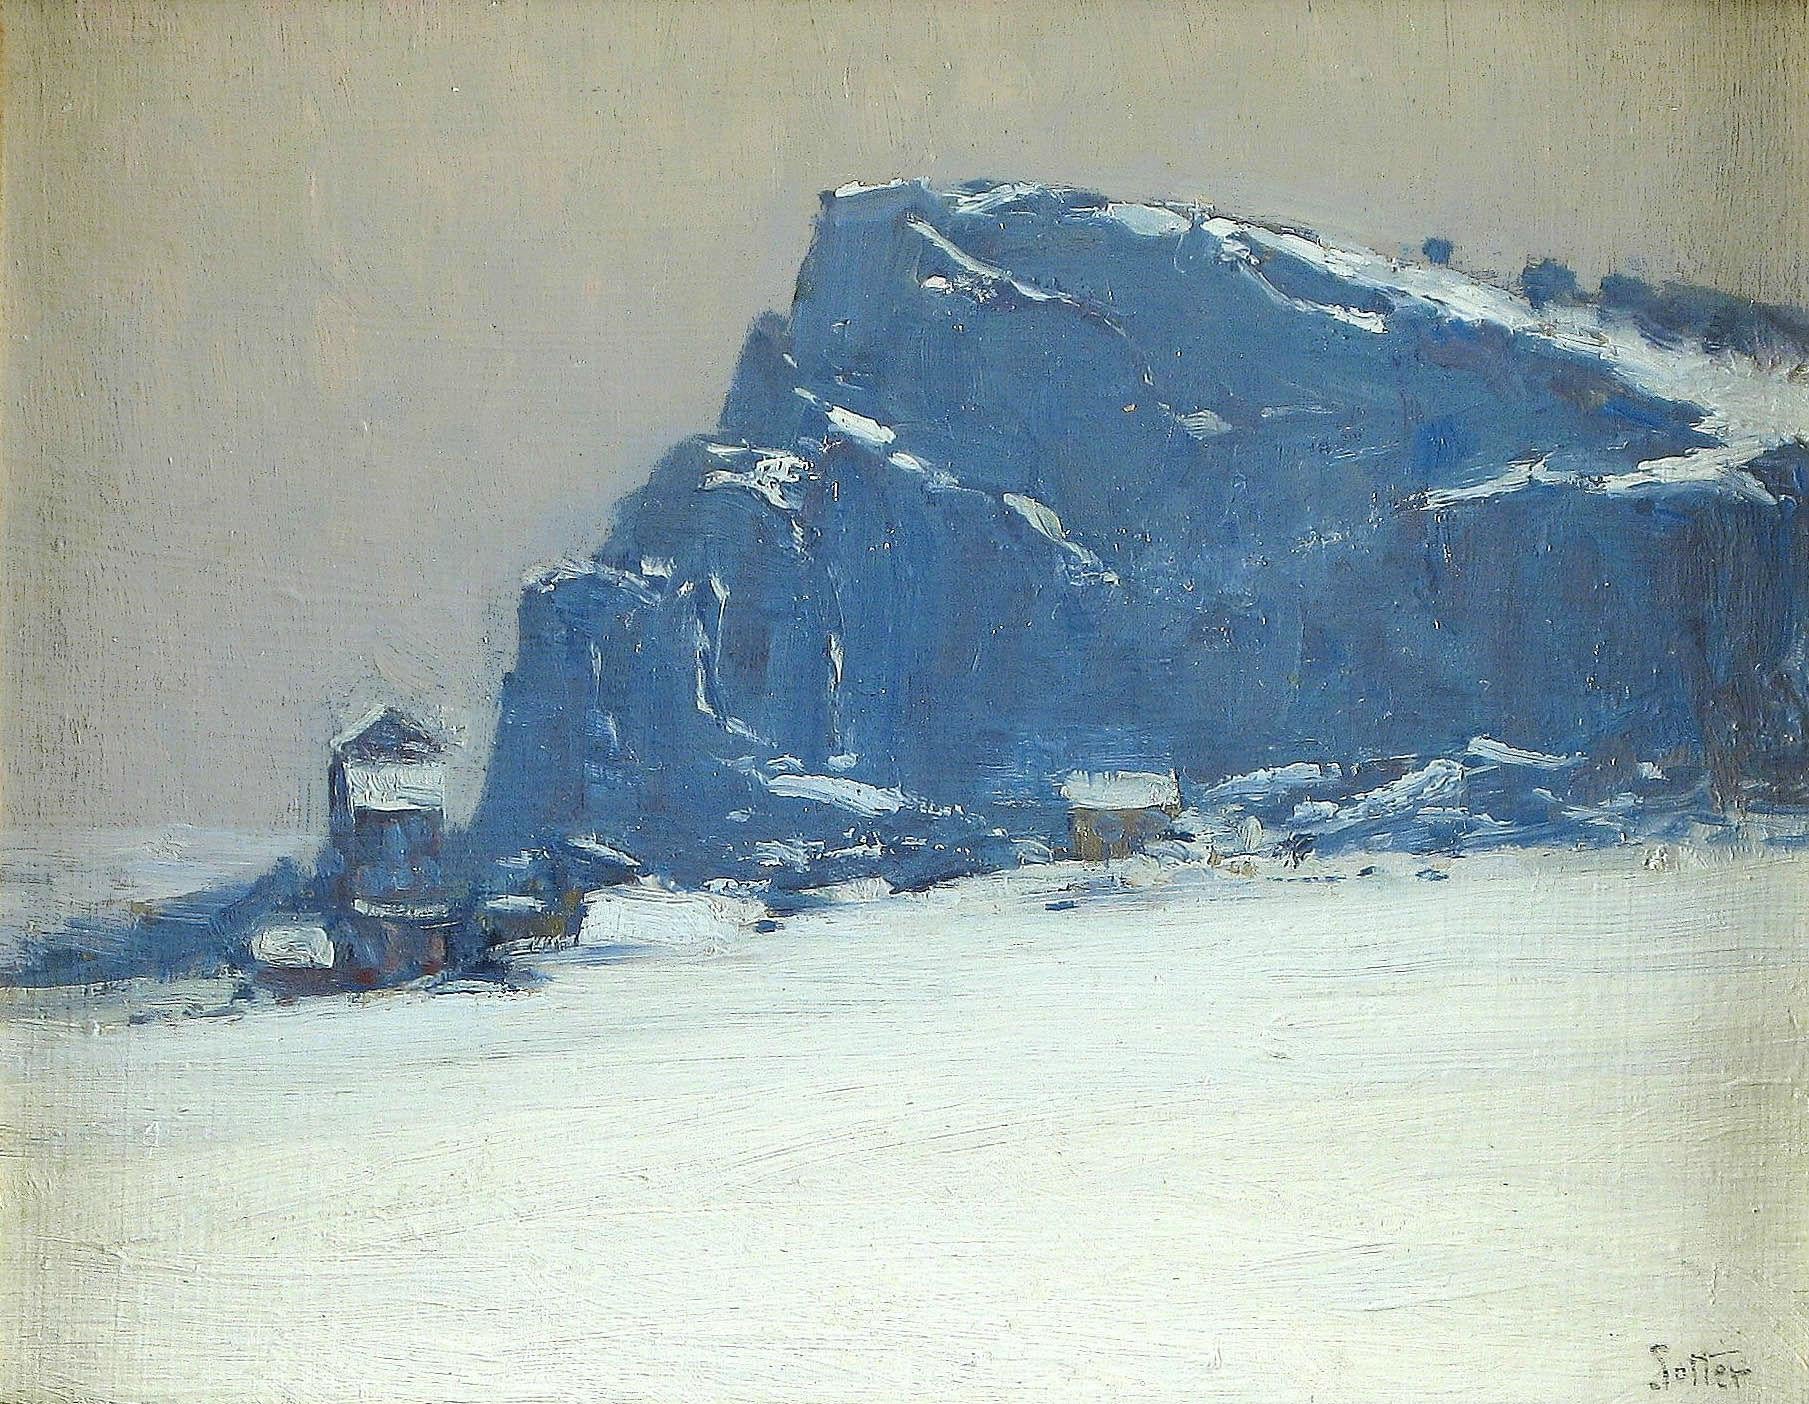 Impressionist snow scene, Winter Nocturne by George William Sotter (1879-1953, American)

George William Sotter (1879-1953)
Winter Nocturne
Oil on board
7 x 9 inches
Signed lower right

Unwarmed by any sunset light / The gray day darkened into